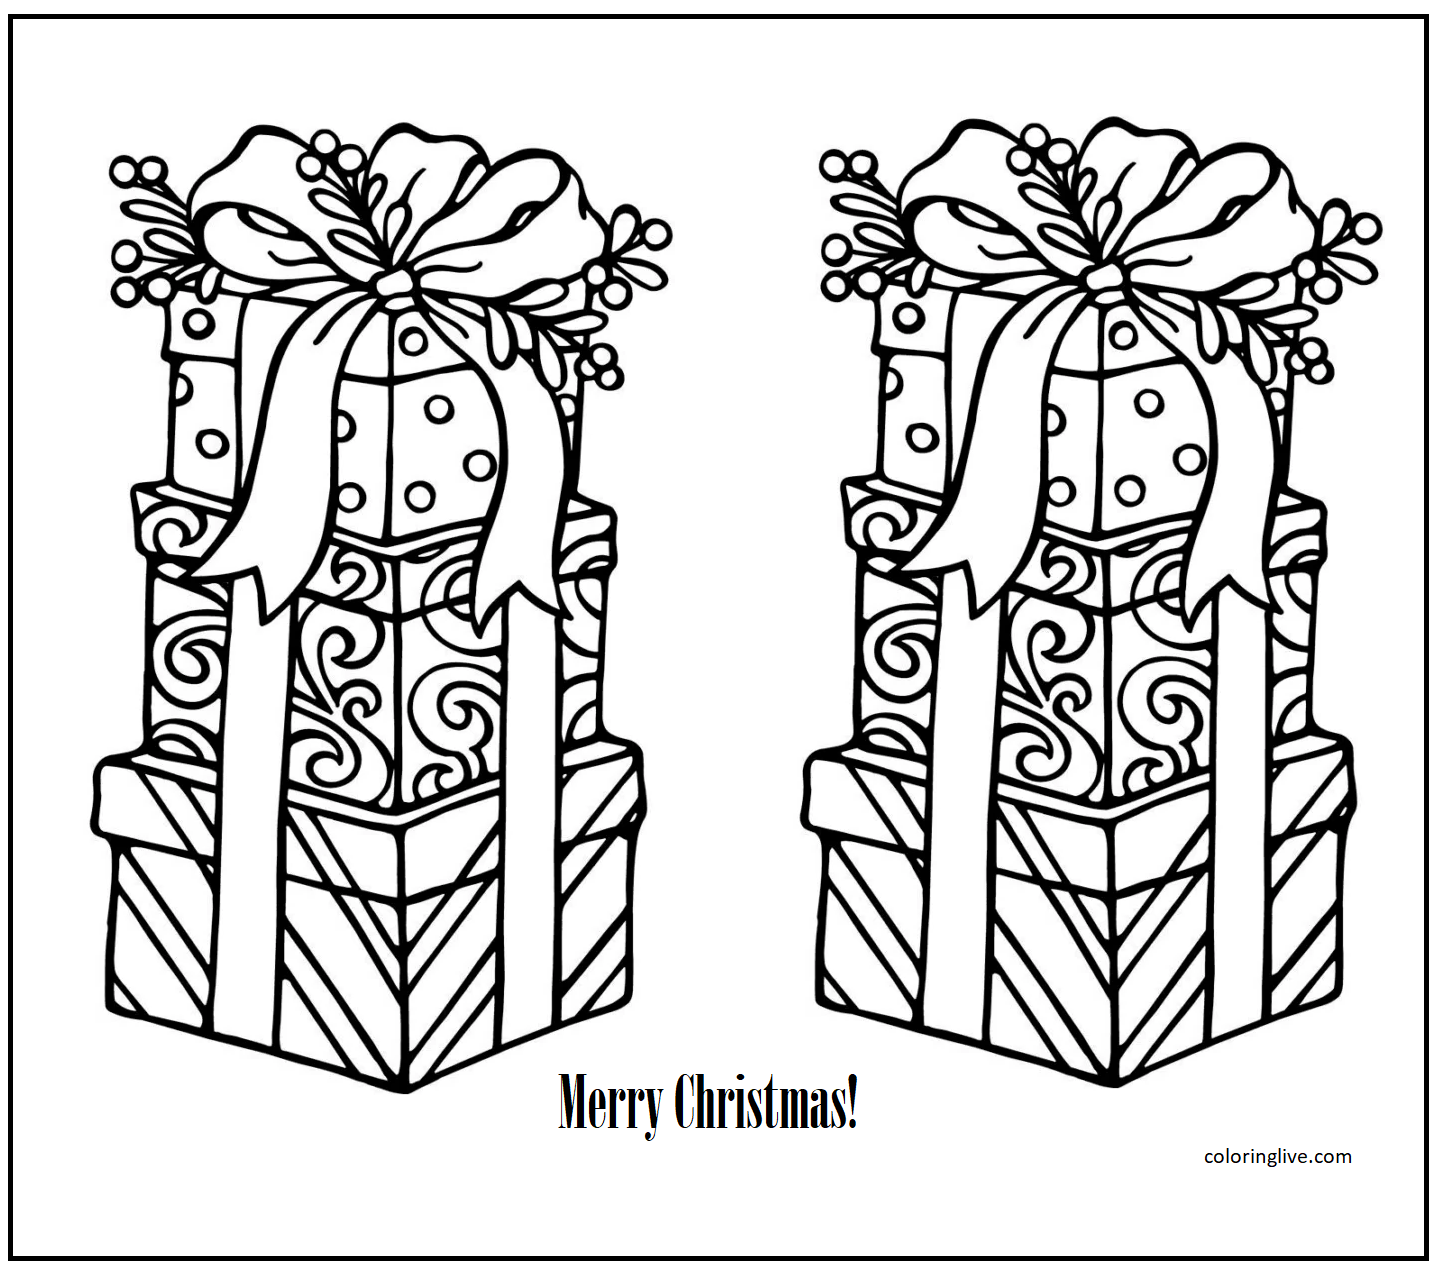 Printable Merry Christmas Present  Sheet Coloring Page for kids.